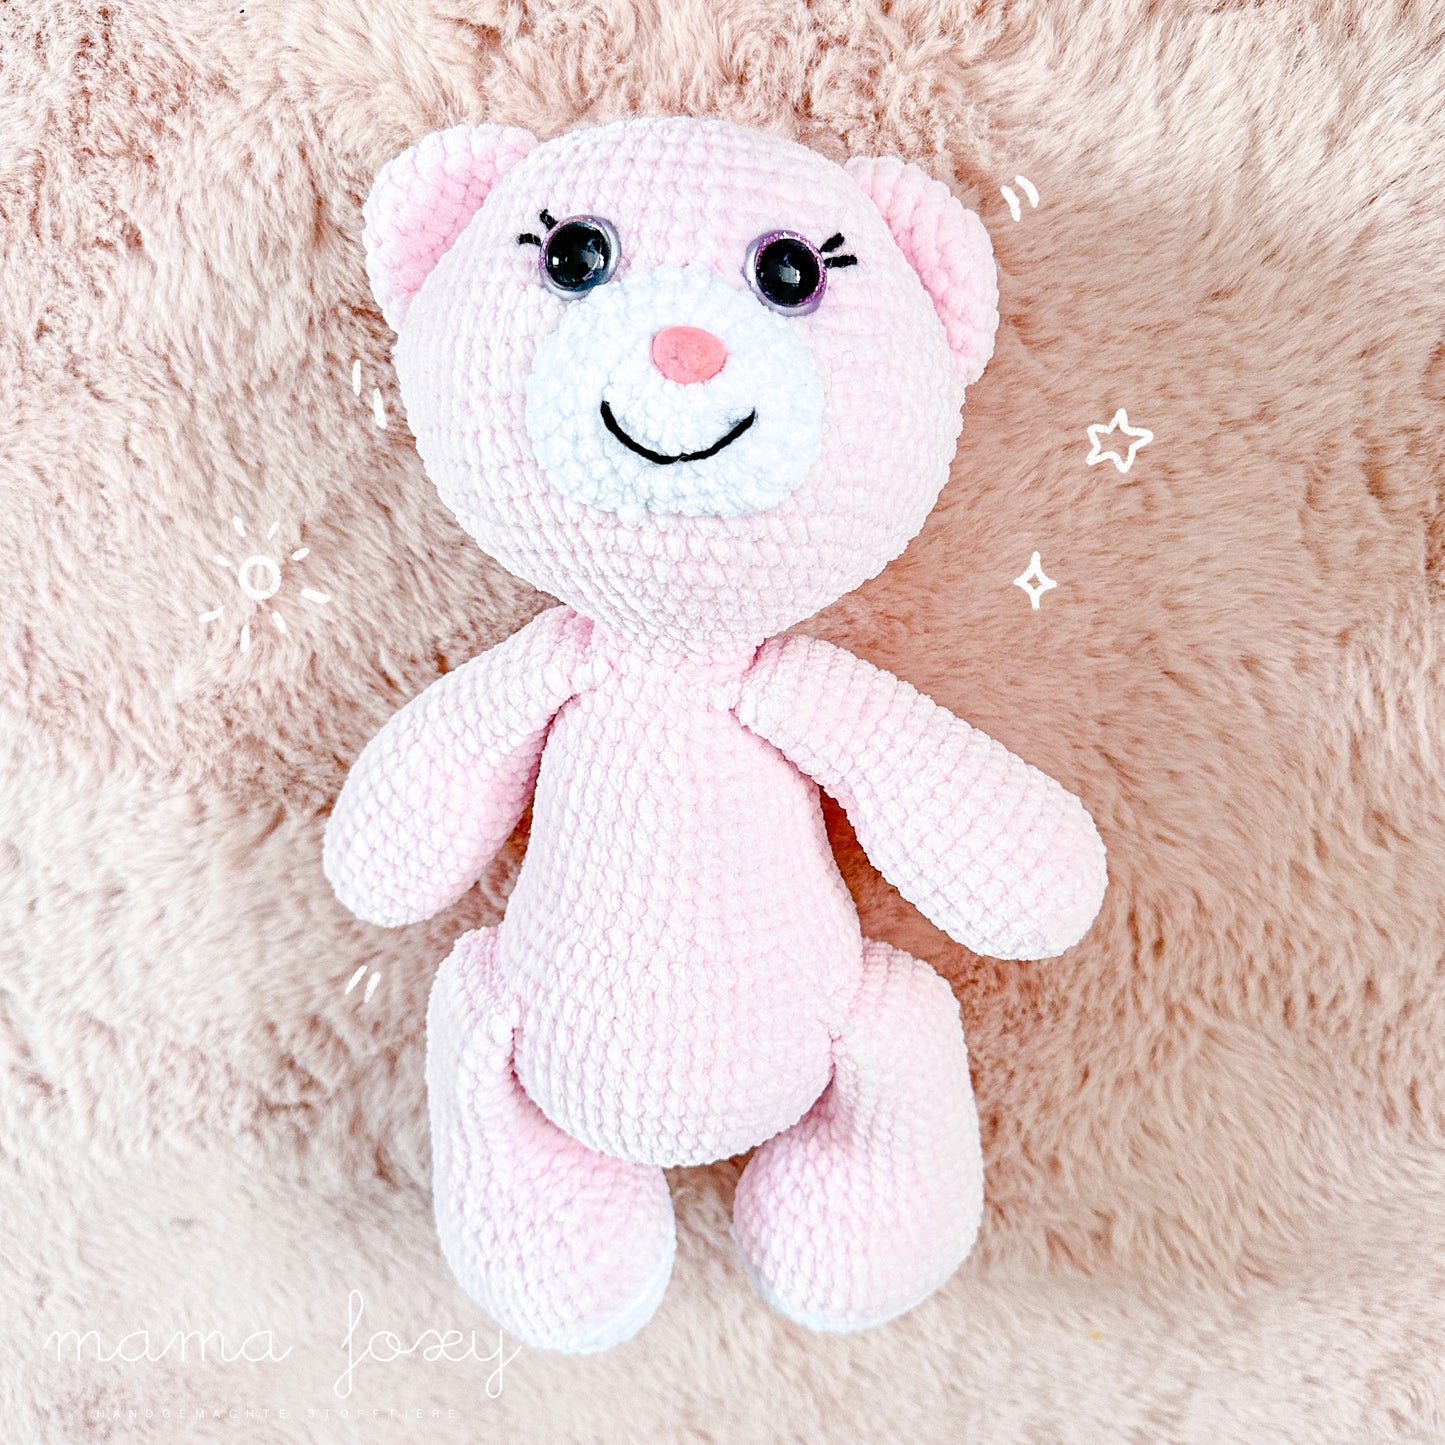 Made by MamaFoxy: Handcrocheted Teddybär "Lilly" & "Mitty"